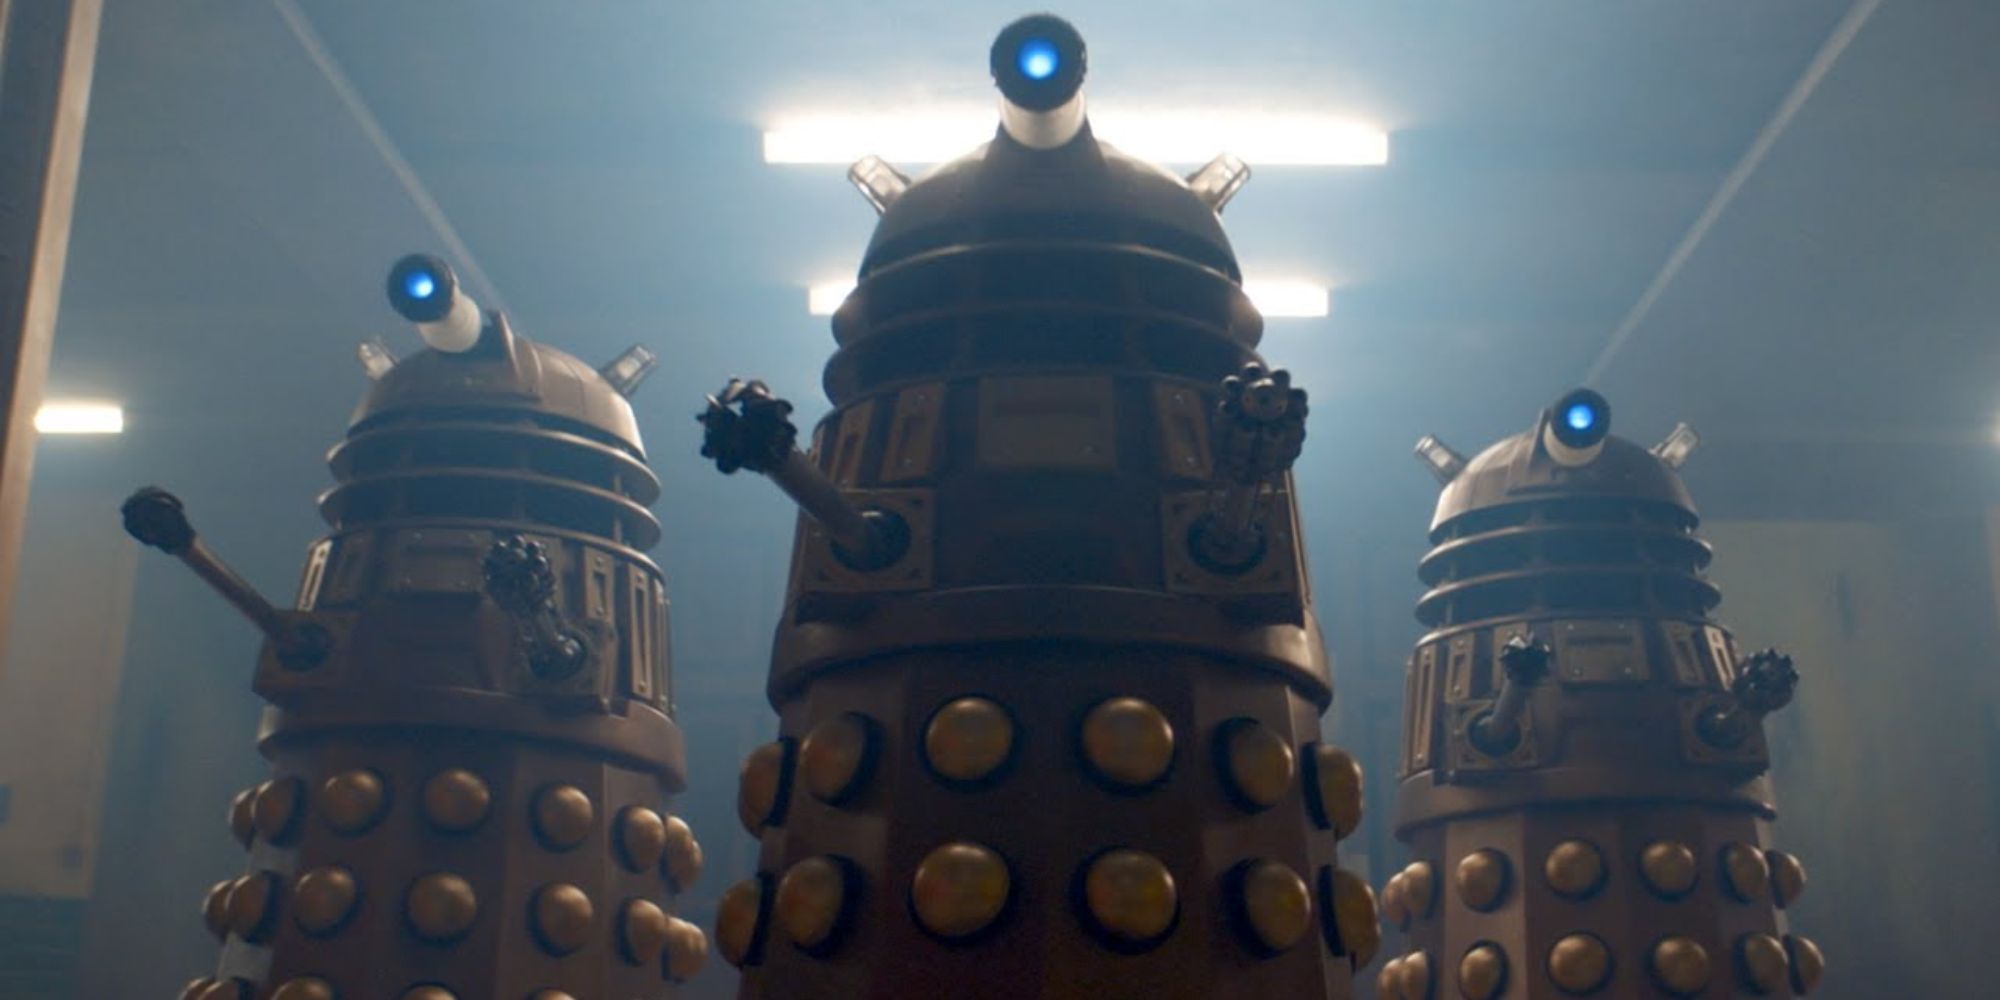 Three Daleks stand over the camera in a dimly lit corridor